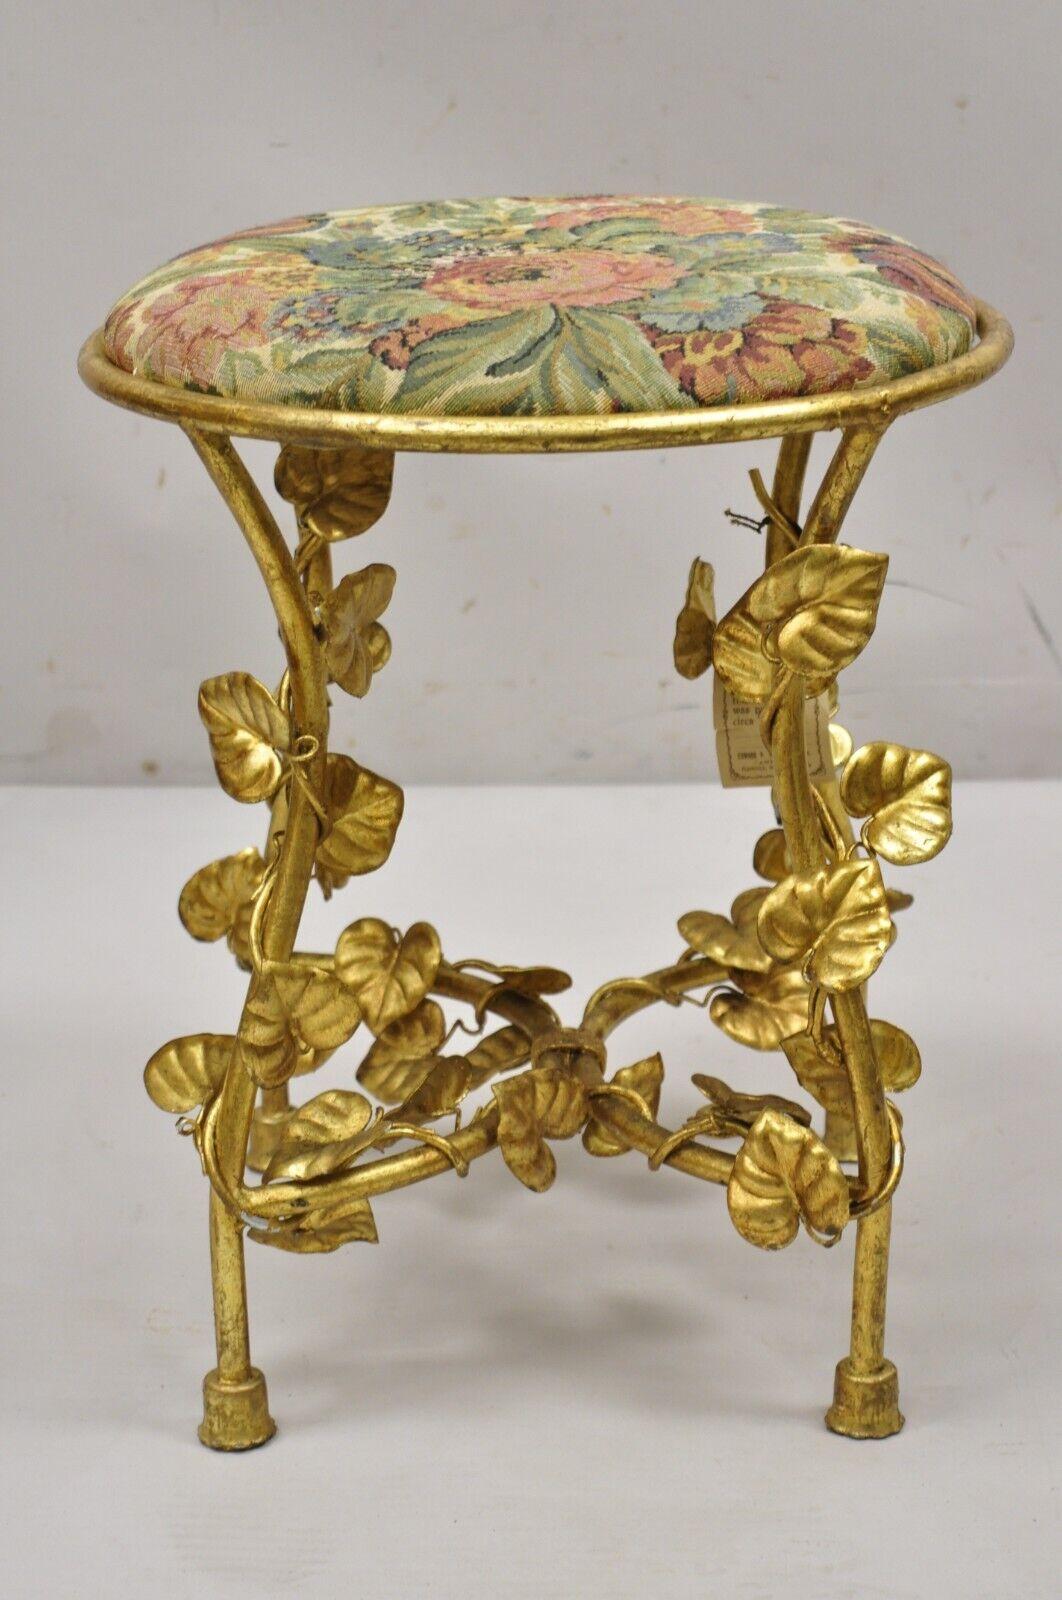 Vintage Italian Hollywood Regency Gold Gilt Leaf Accent Iron Vanity Bench Stool Seat. Item features a gold gilt leaf finish, iron frame, round floral upholstered seat, leaf accent throughout, quality Italian craftsmanship, great style and form,